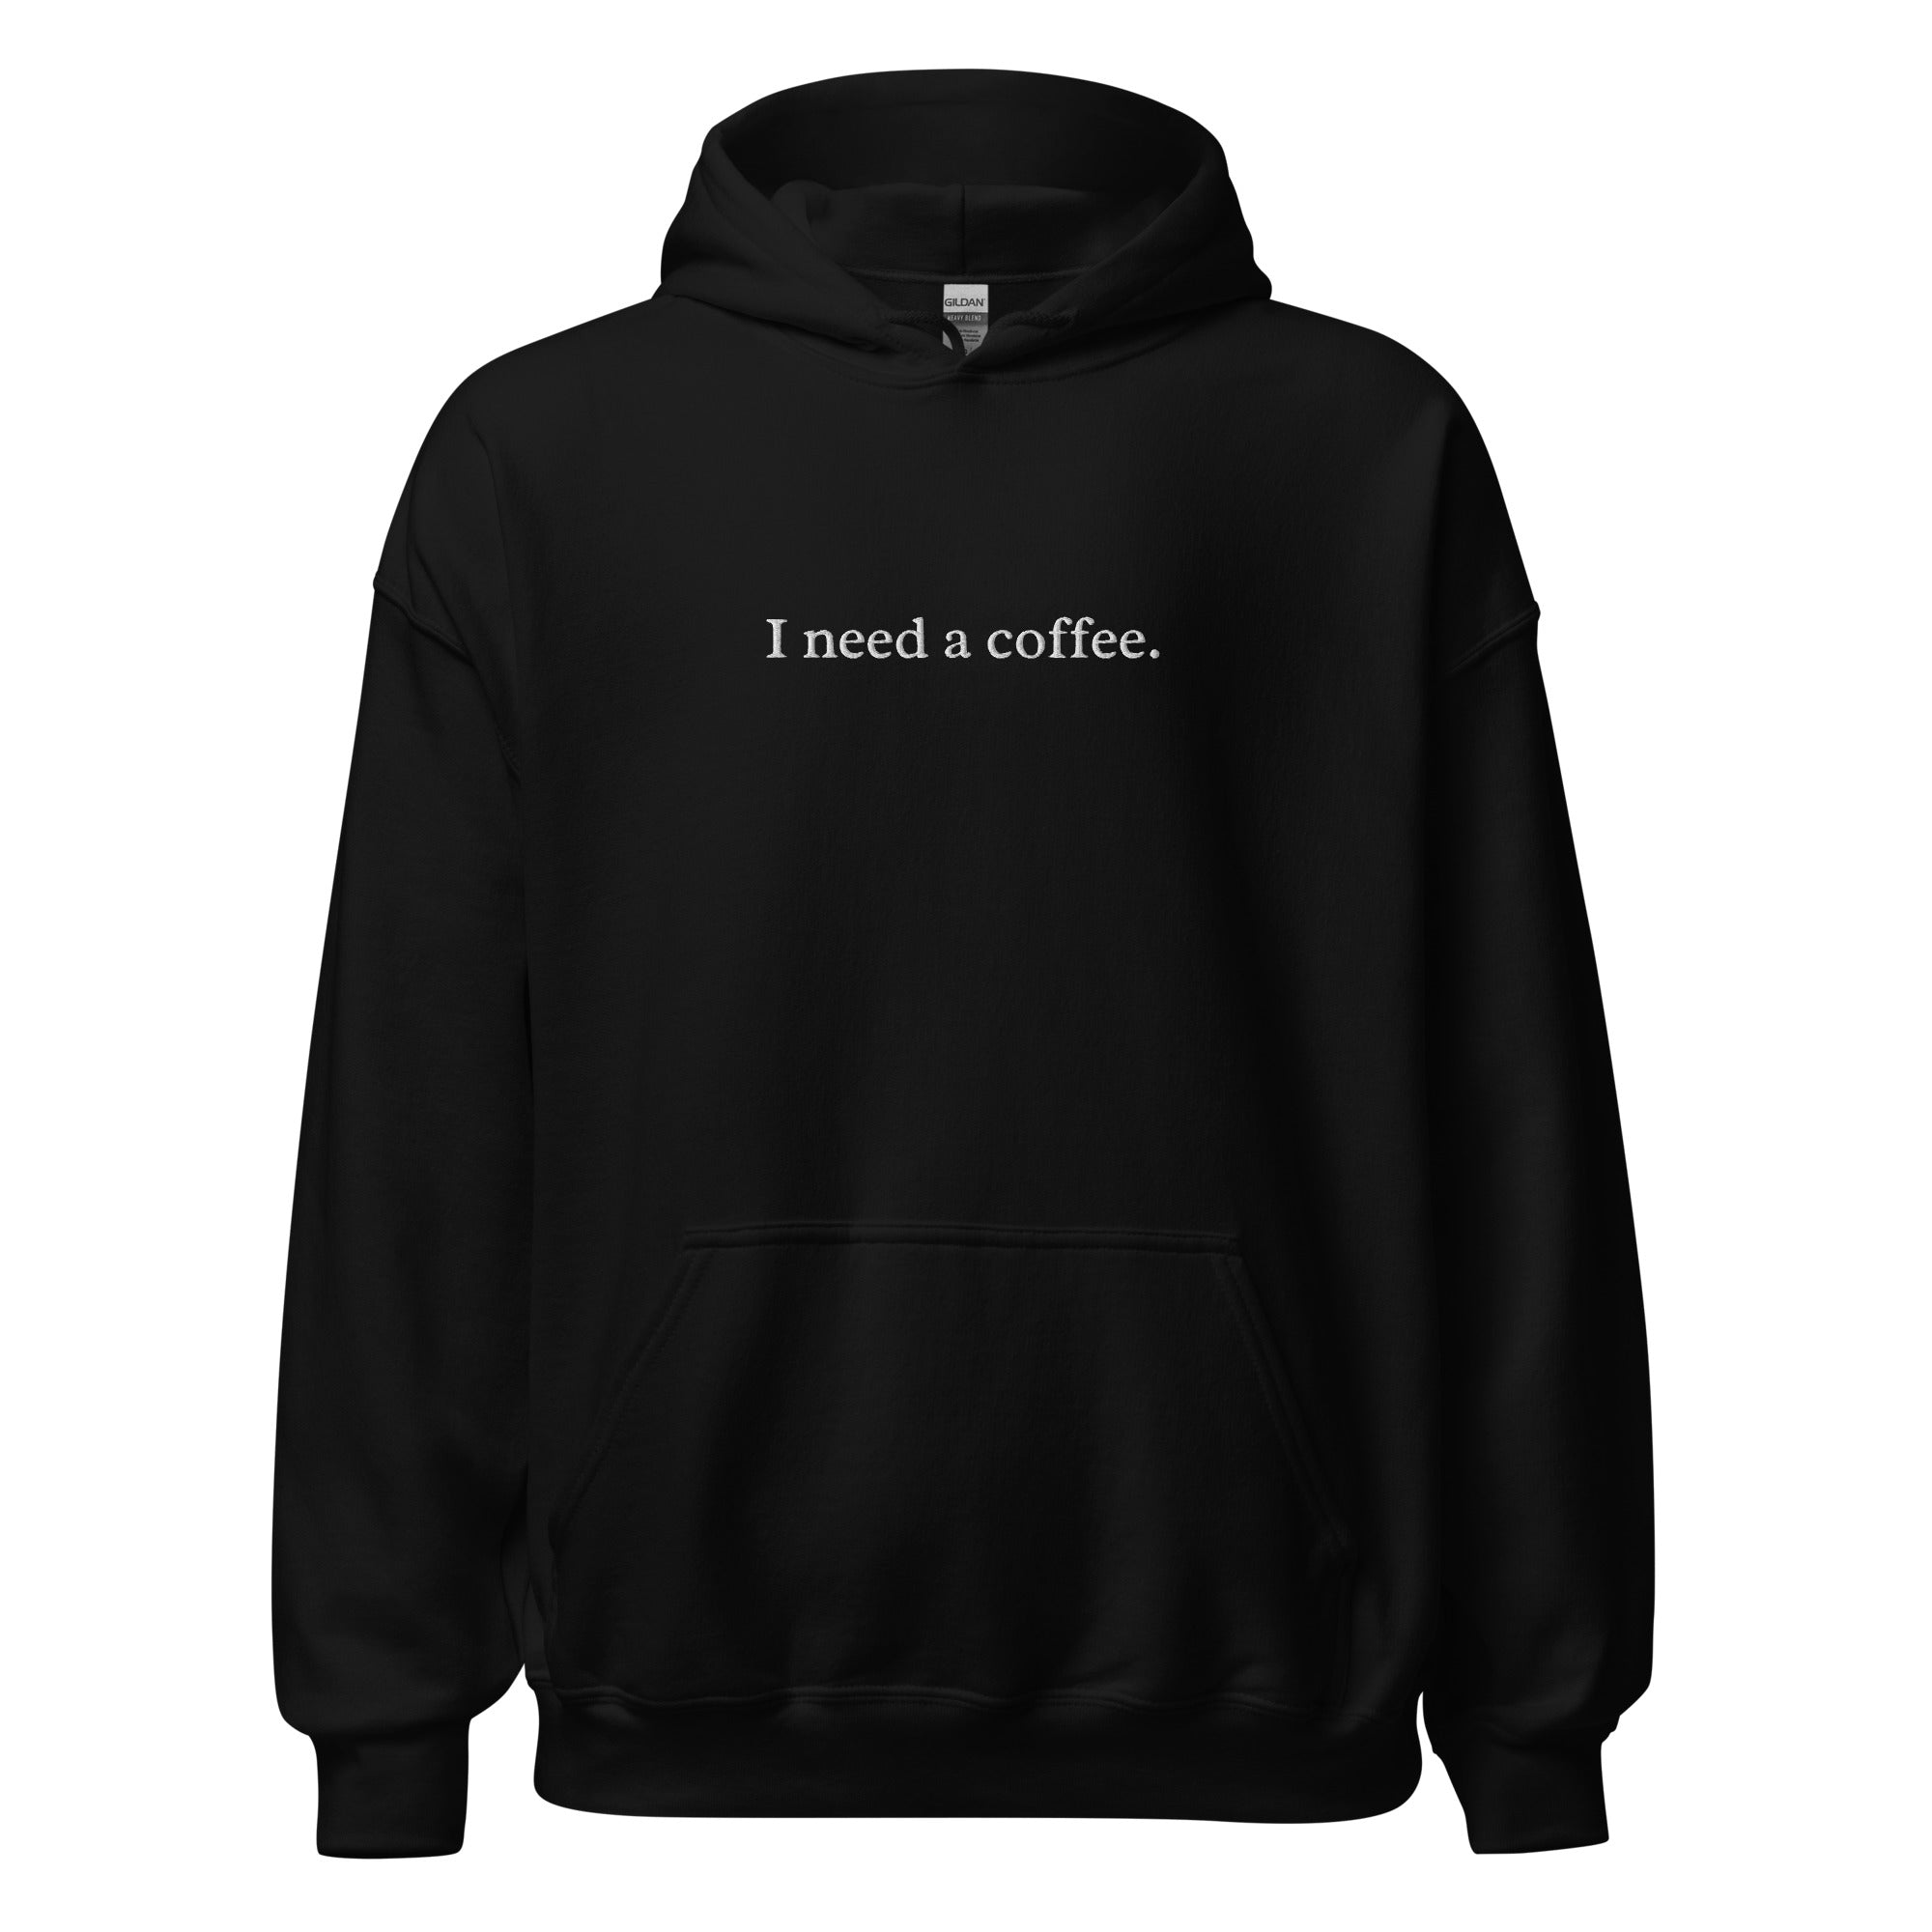 "I Need a Coffee" Embroidered Hoodie